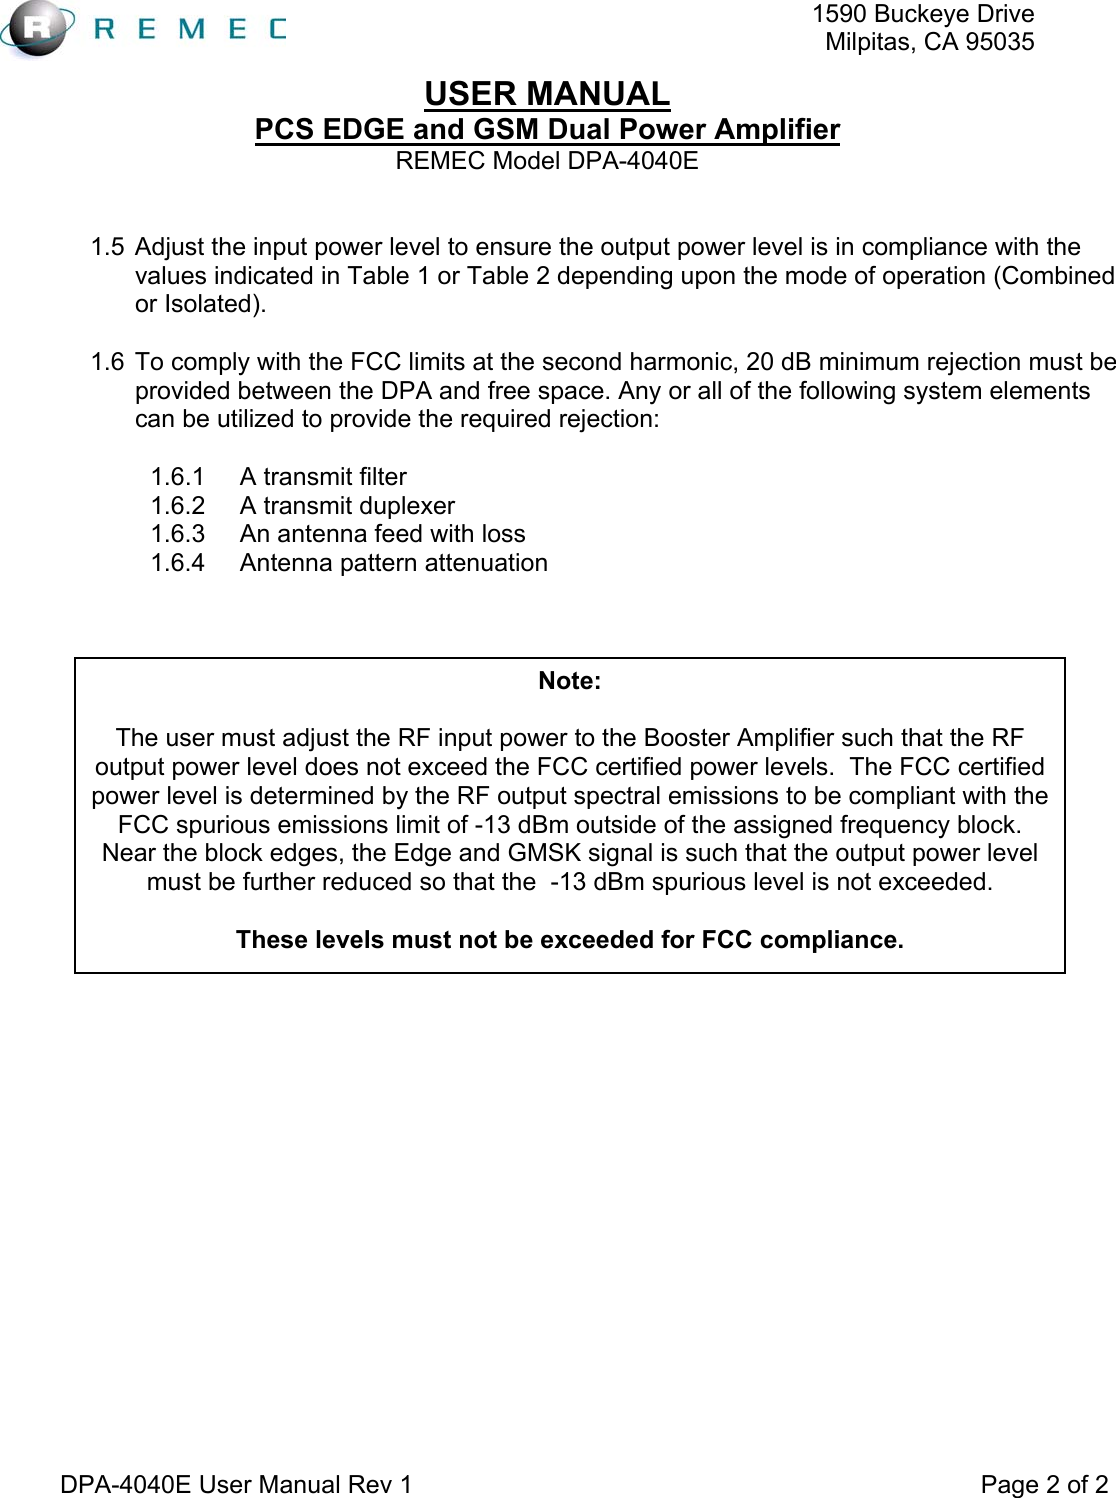   1590 Buckeye DriveMilpitas, CA 95035USER MANUAL PCS EDGE and GSM Dual Power Amplifier REMEC Model DPA-4040E  DPA-4040E User Manual Rev 1                                                                                 Page 2 of 2  1.5  Adjust the input power level to ensure the output power level is in compliance with the values indicated in Table 1 or Table 2 depending upon the mode of operation (Combined or Isolated).  1.6  To comply with the FCC limits at the second harmonic, 20 dB minimum rejection must be provided between the DPA and free space. Any or all of the following system elements can be utilized to provide the required rejection:  1.6.1  A transmit filter 1.6.2  A transmit duplexer 1.6.3  An antenna feed with loss 1.6.4  Antenna pattern attenuation           Note:  The user must adjust the RF input power to the Booster Amplifier such that the RF output power level does not exceed the FCC certified power levels.  The FCC certified power level is determined by the RF output spectral emissions to be compliant with the FCC spurious emissions limit of -13 dBm outside of the assigned frequency block.  Near the block edges, the Edge and GMSK signal is such that the output power level must be further reduced so that the  -13 dBm spurious level is not exceeded.  These levels must not be exceeded for FCC compliance. 